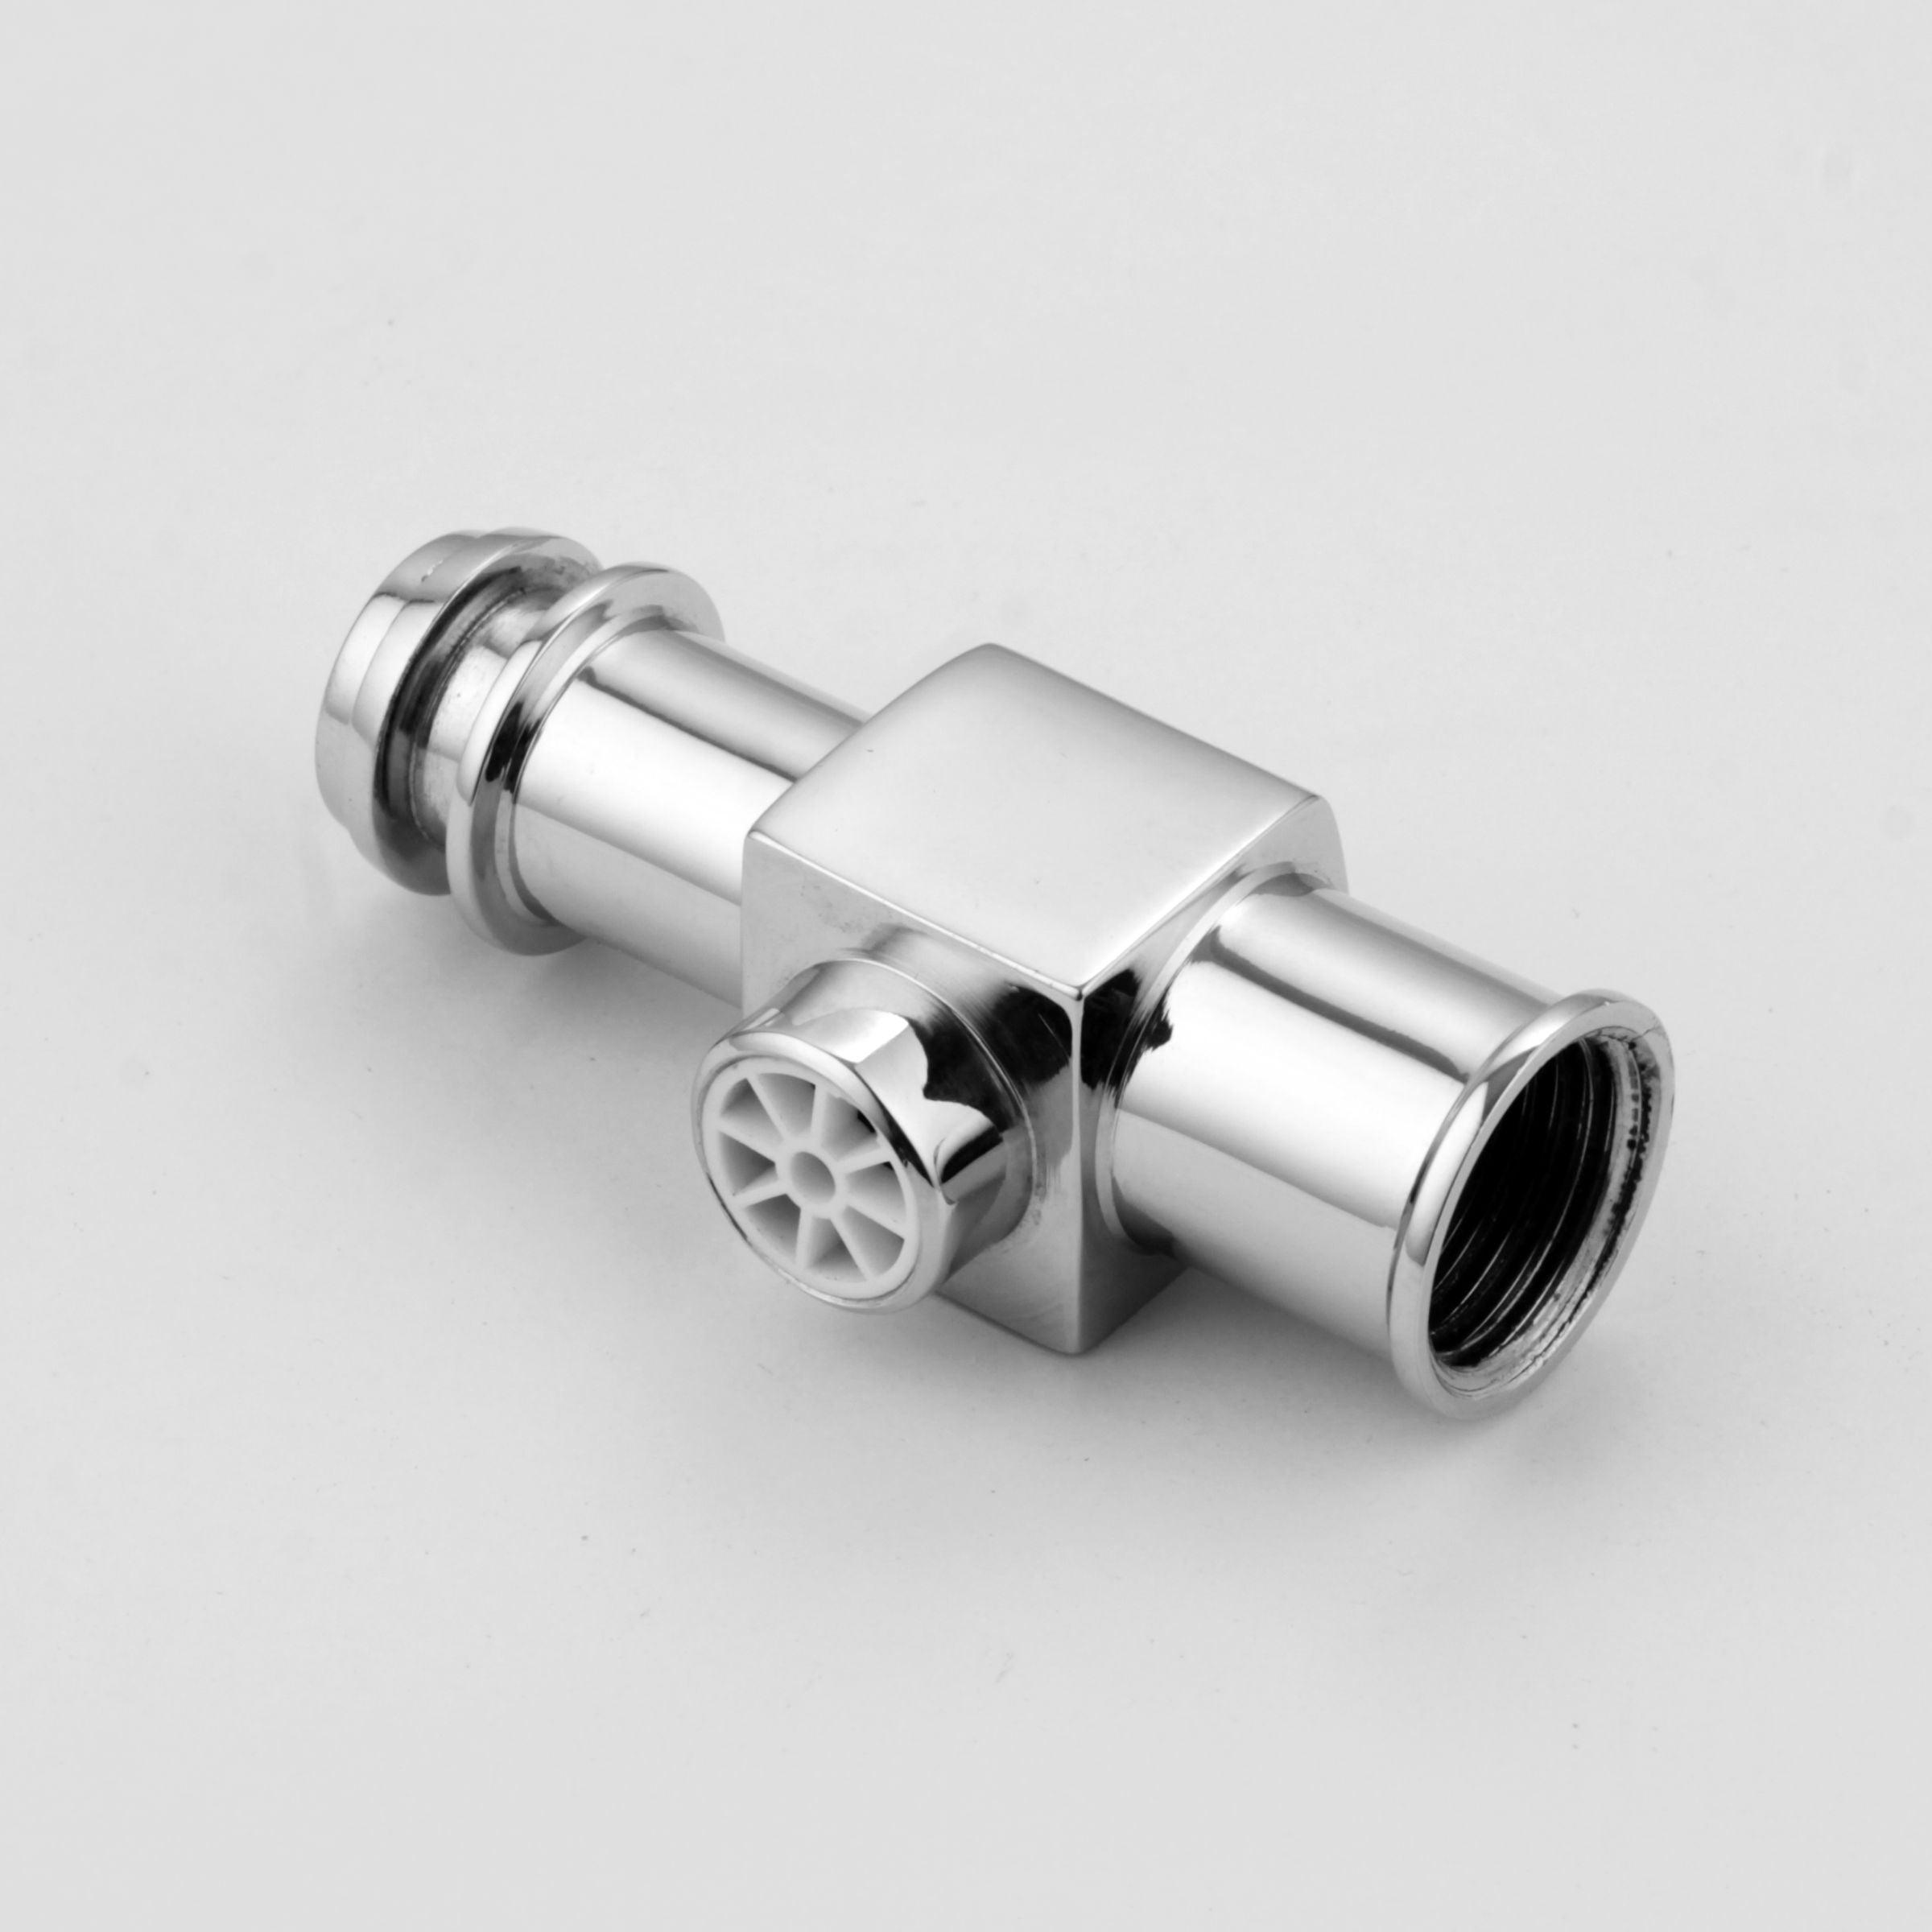 Square Push Valve Brass Faucet products